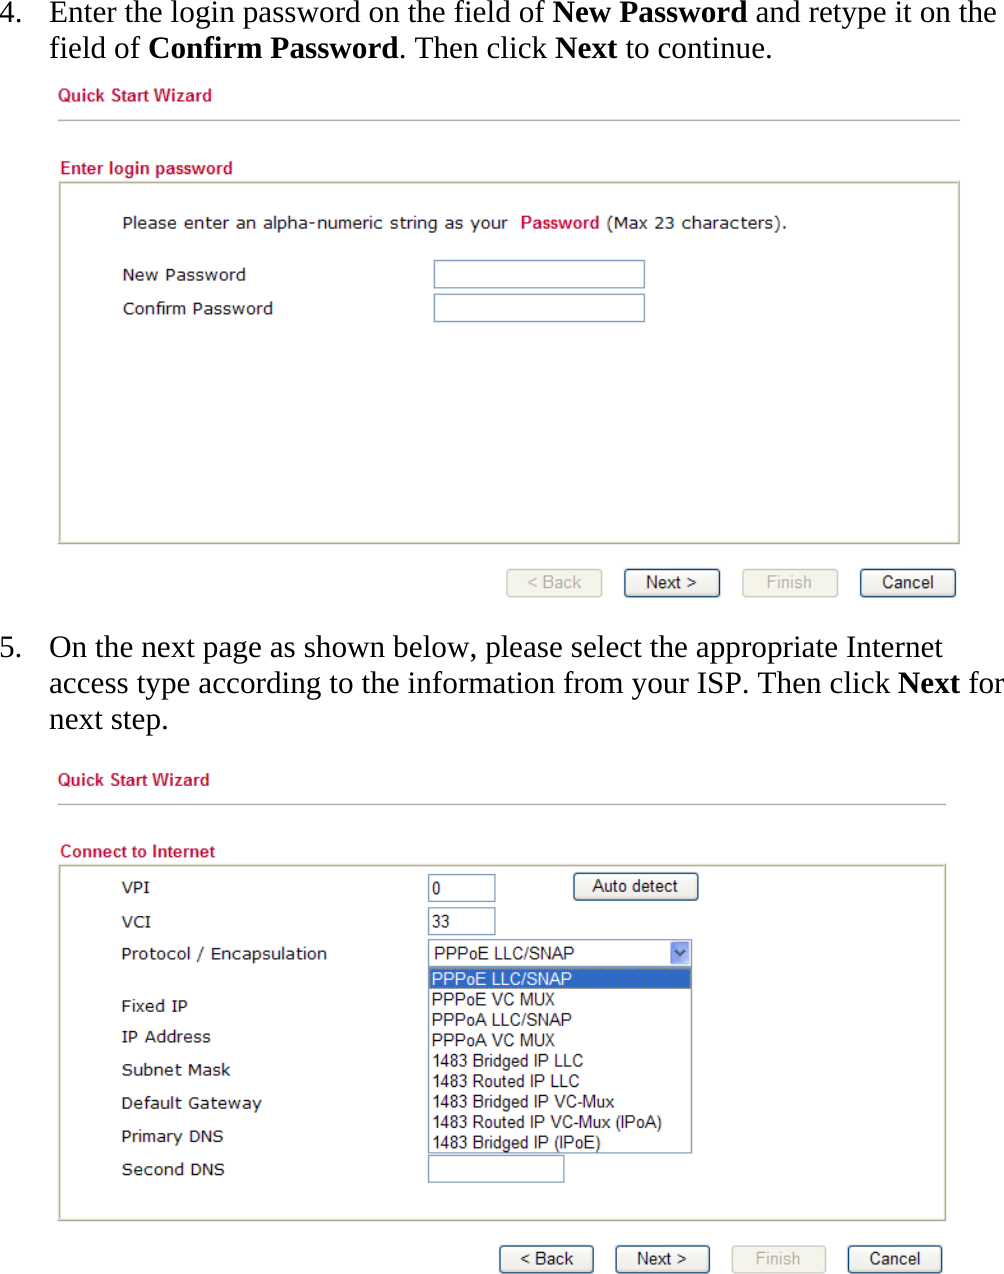   4. Enter the login password on the field of New Password and retype it on the field of Confirm Password. Then click Next to continue.  5. On the next page as shown below, please select the appropriate Internet access type according to the information from your ISP. Then click Next for next step.  